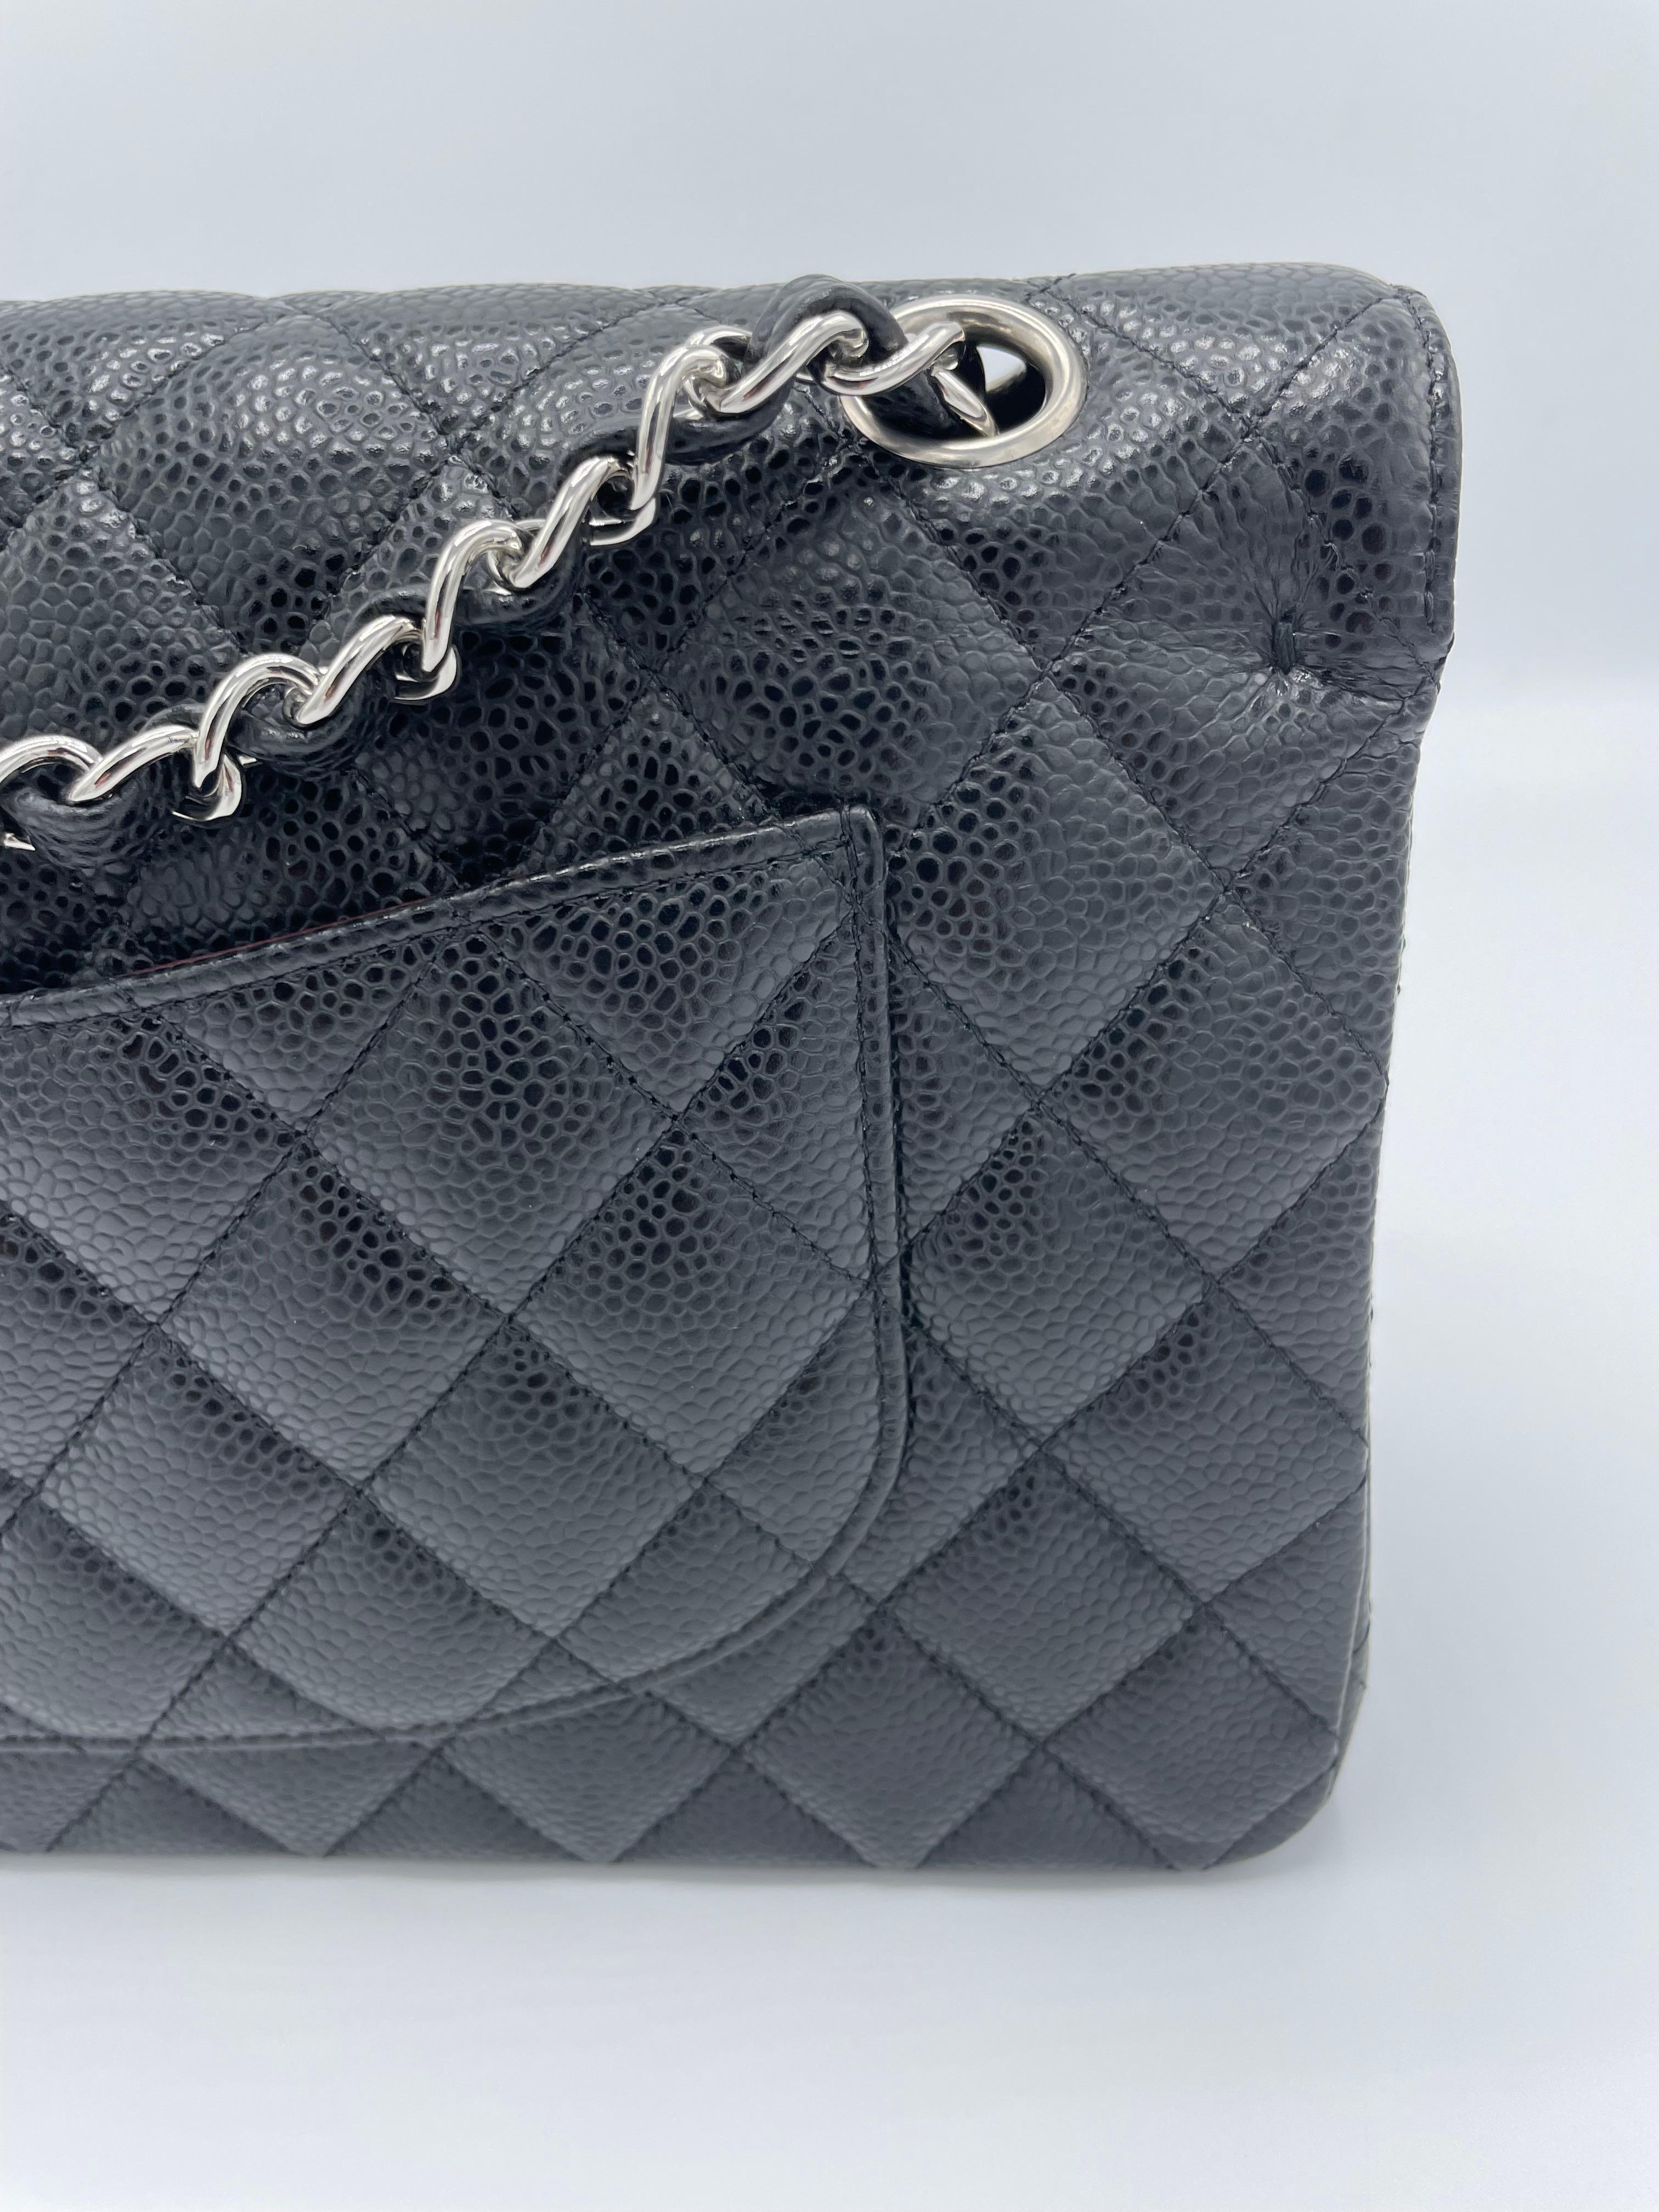  Chanel Classic Double Flap Black Silver Caviar Leather 2